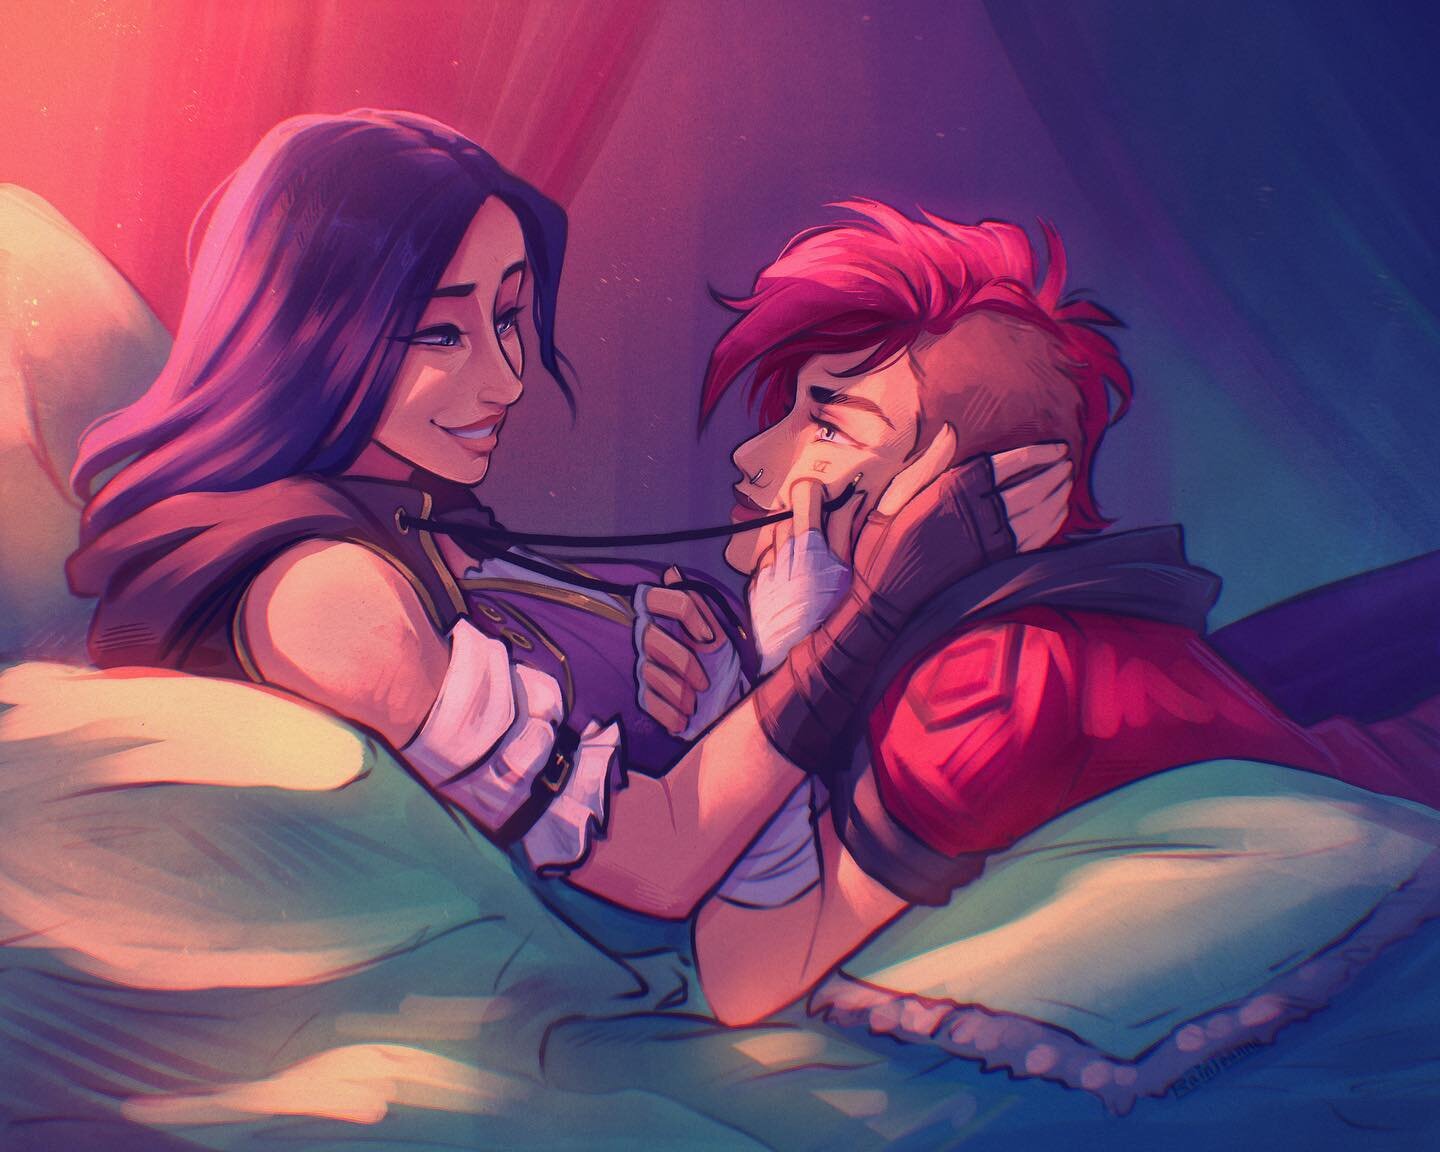 Vi &amp; Caitlyn! 💙💗 (this was meant to be for Valentine&rsquo;s Day but I&rsquo;m late lol oops) (*/&omega;＼)
.
I&rsquo;m actually surprised I haven&rsquo;t done a Jinx drawing yet. But that&rsquo;s incoming, don&rsquo;t you worry. 
.
What should 